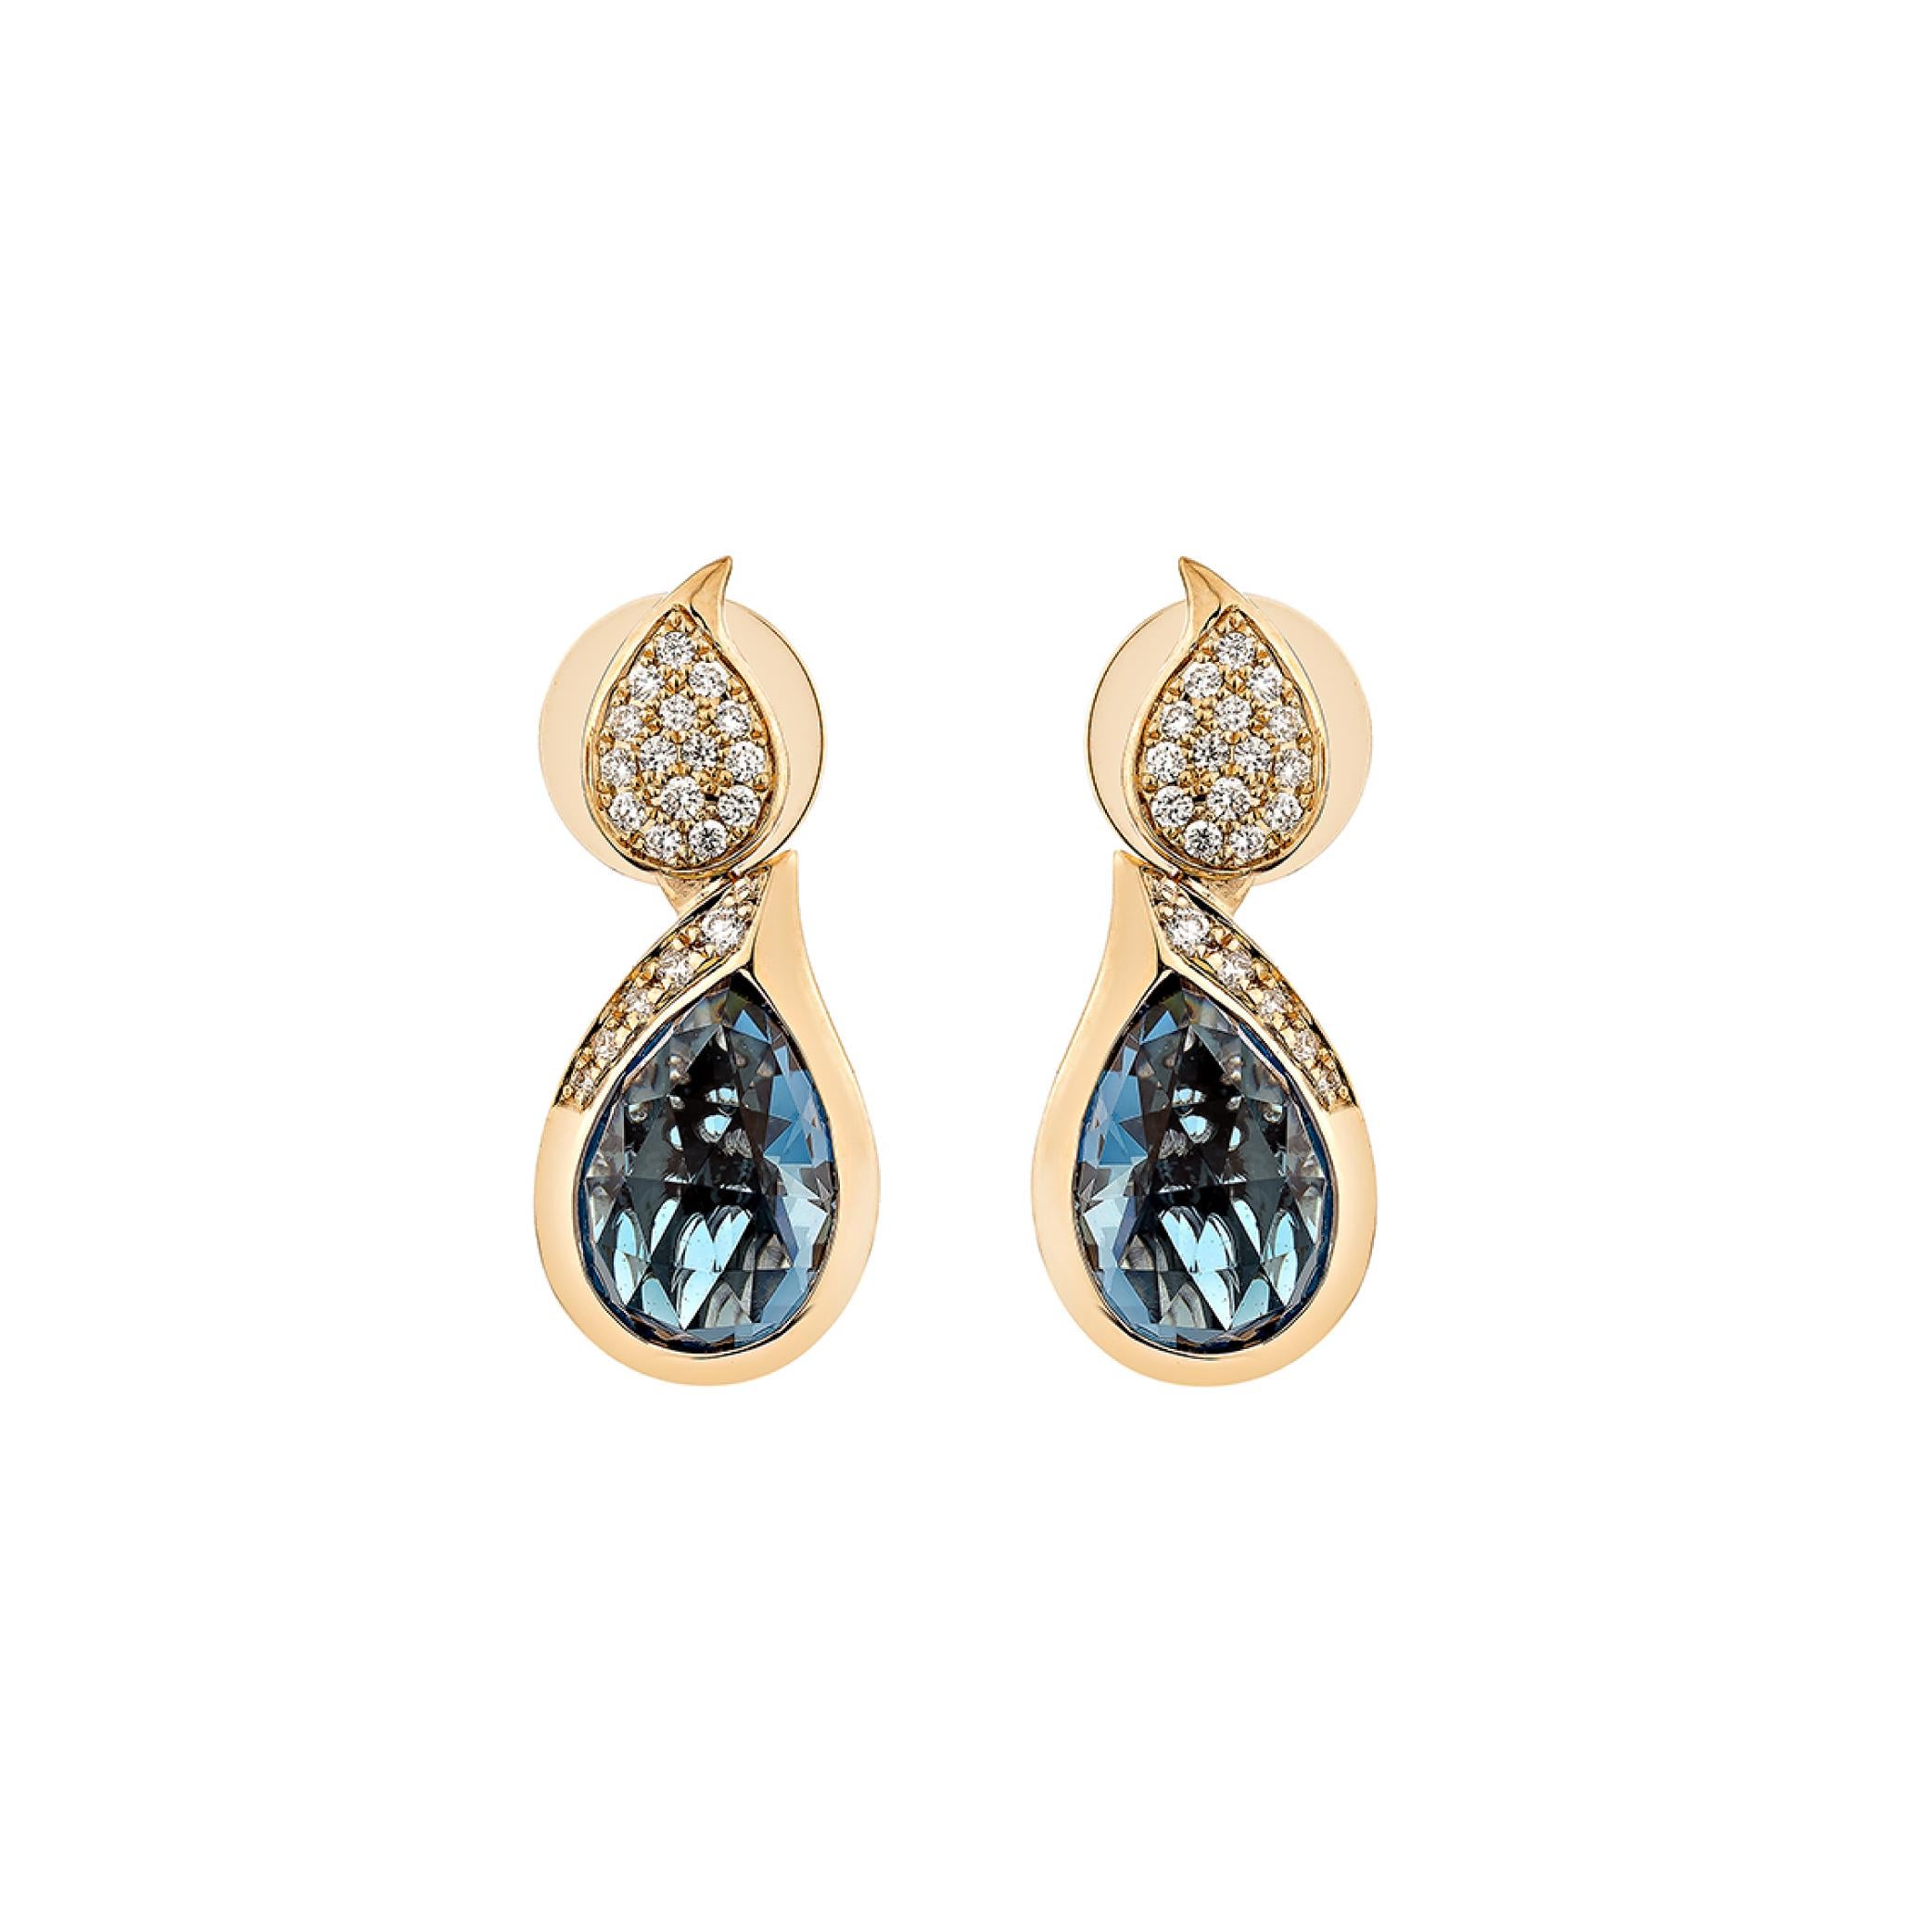 Contemporary 5.369 Carat London Blue Topaz Drop Earring in 18KRG With White Diamond. For Sale